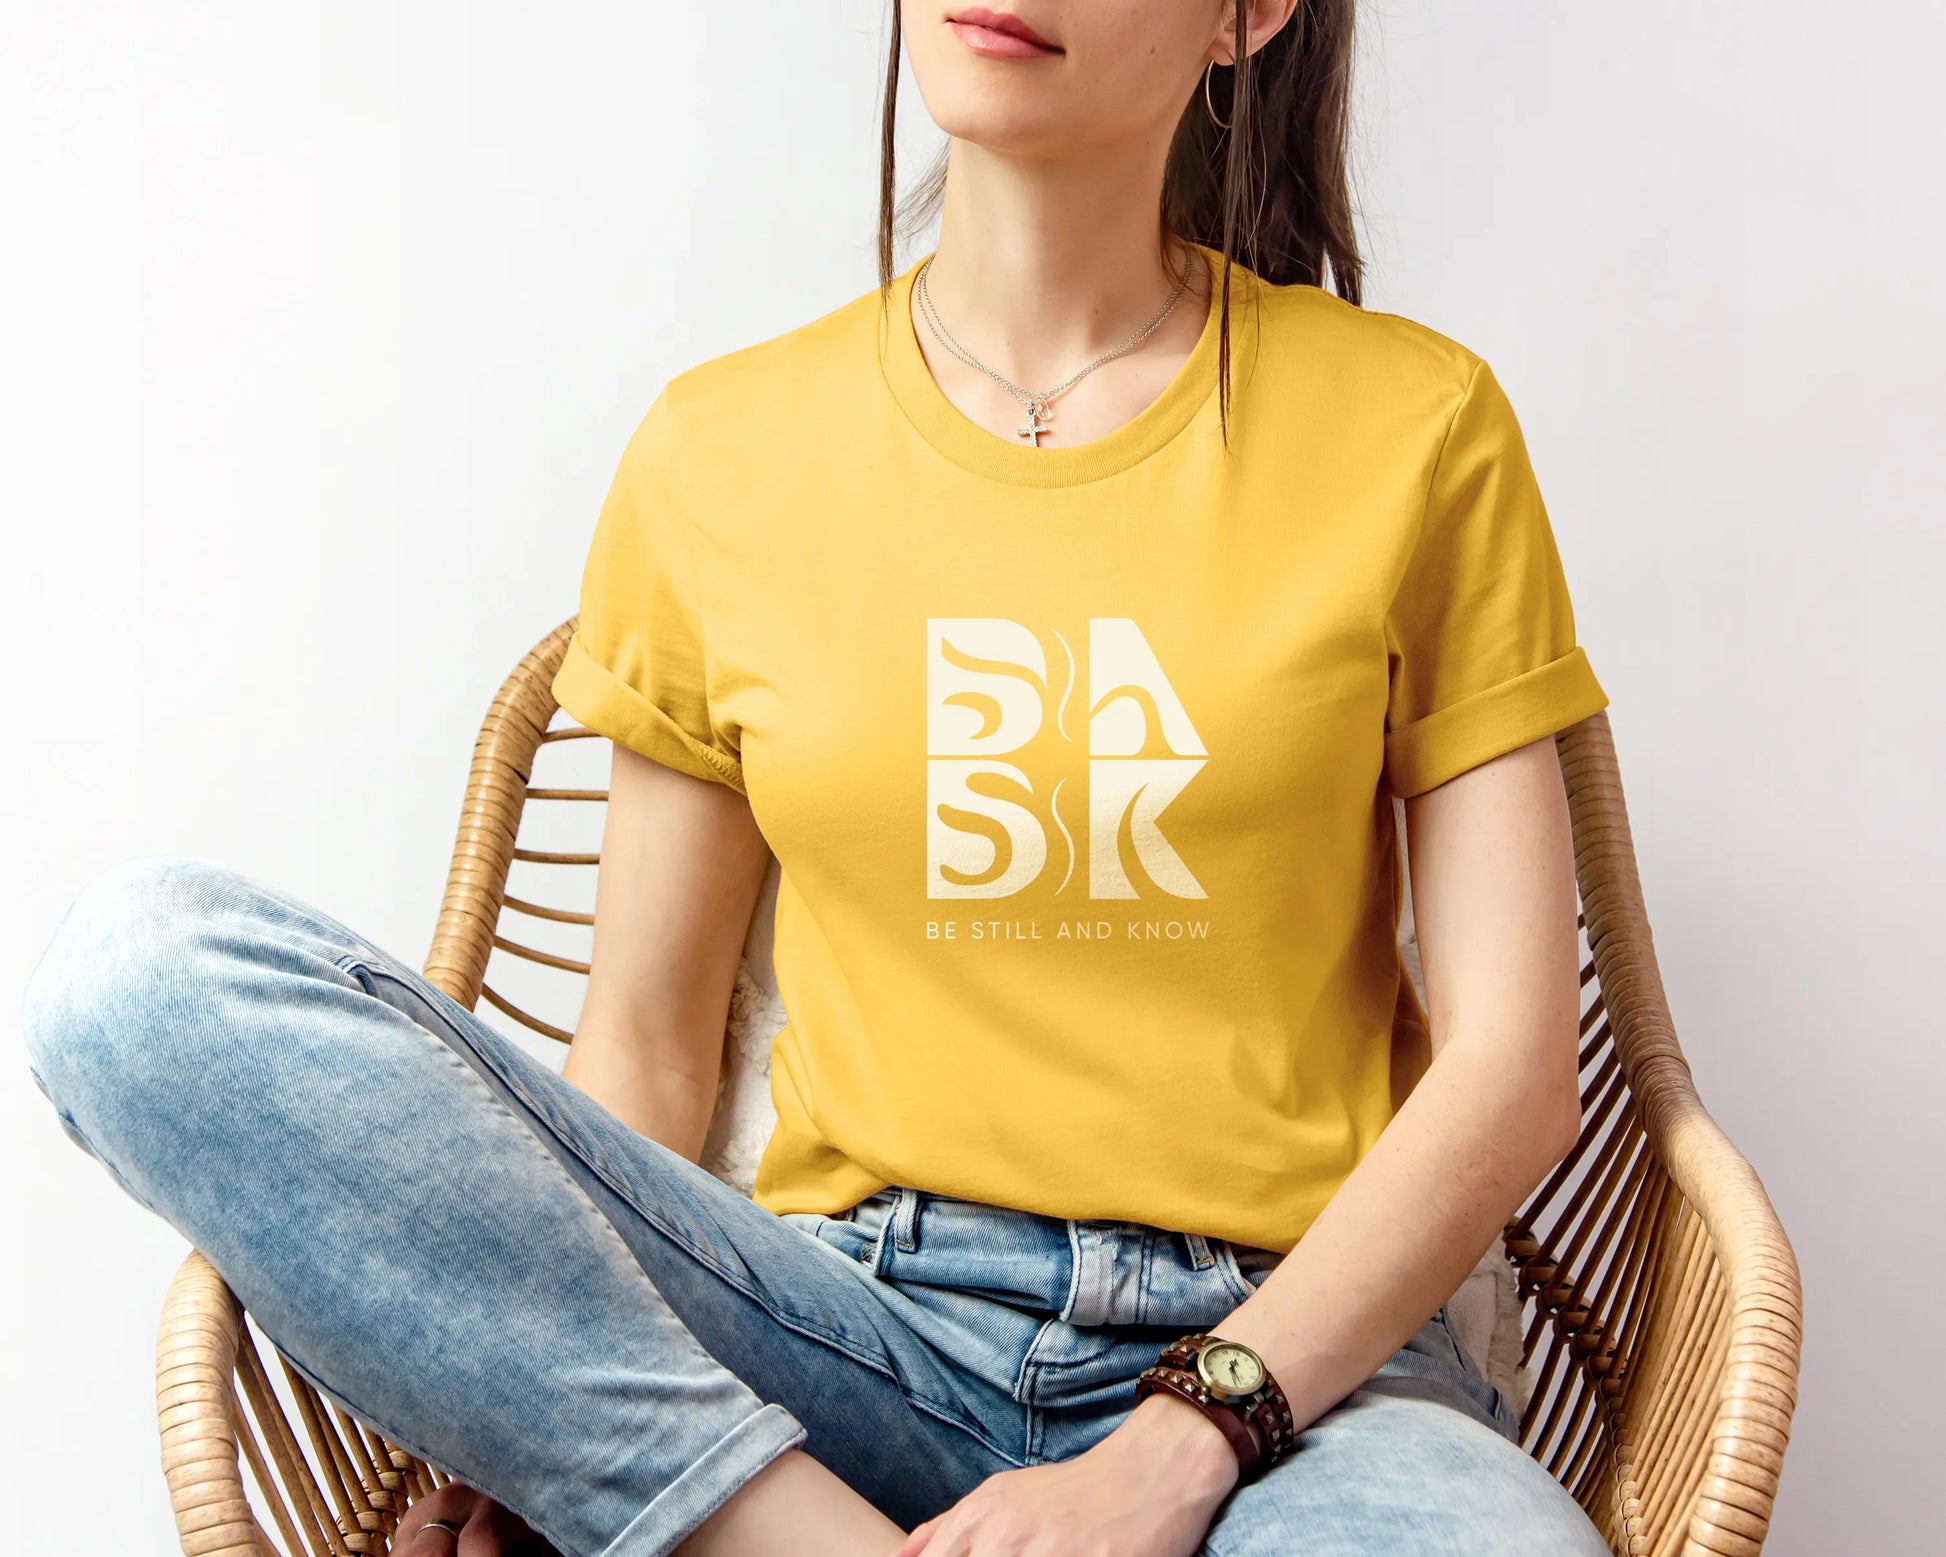 A woman sitting in a chair wearing a yellow t-shirt showcasing the "Golden Coast Tee In Maize Yellow" by Be Still and Know.